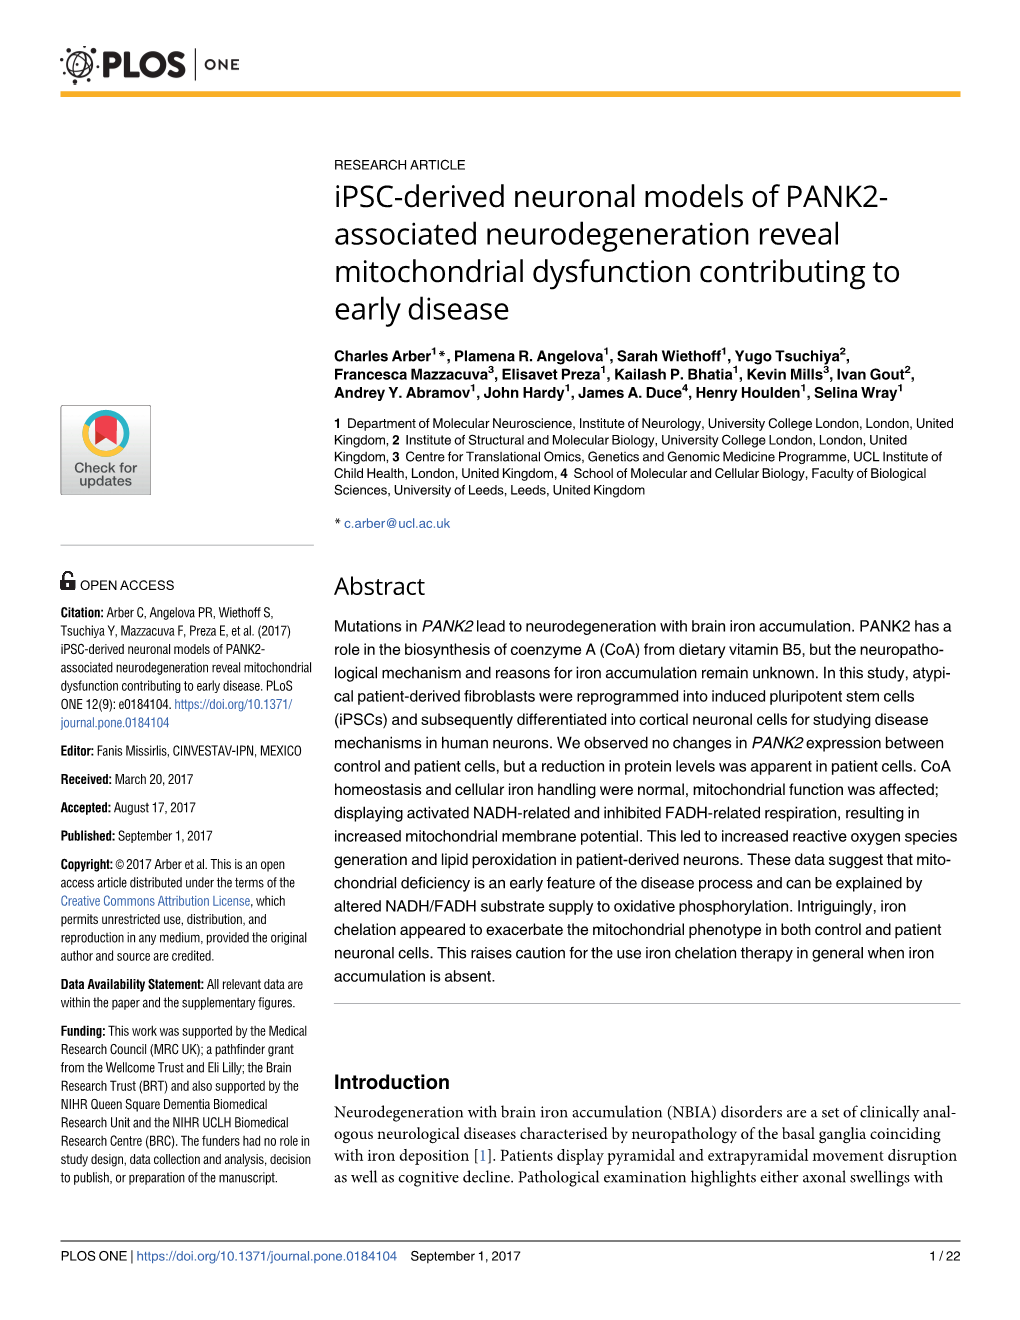 Ipsc-Derived Neuronal Models of PANK2- Associated Neurodegeneration Reveal Mitochondrial Dysfunction Contributing to Early Disease